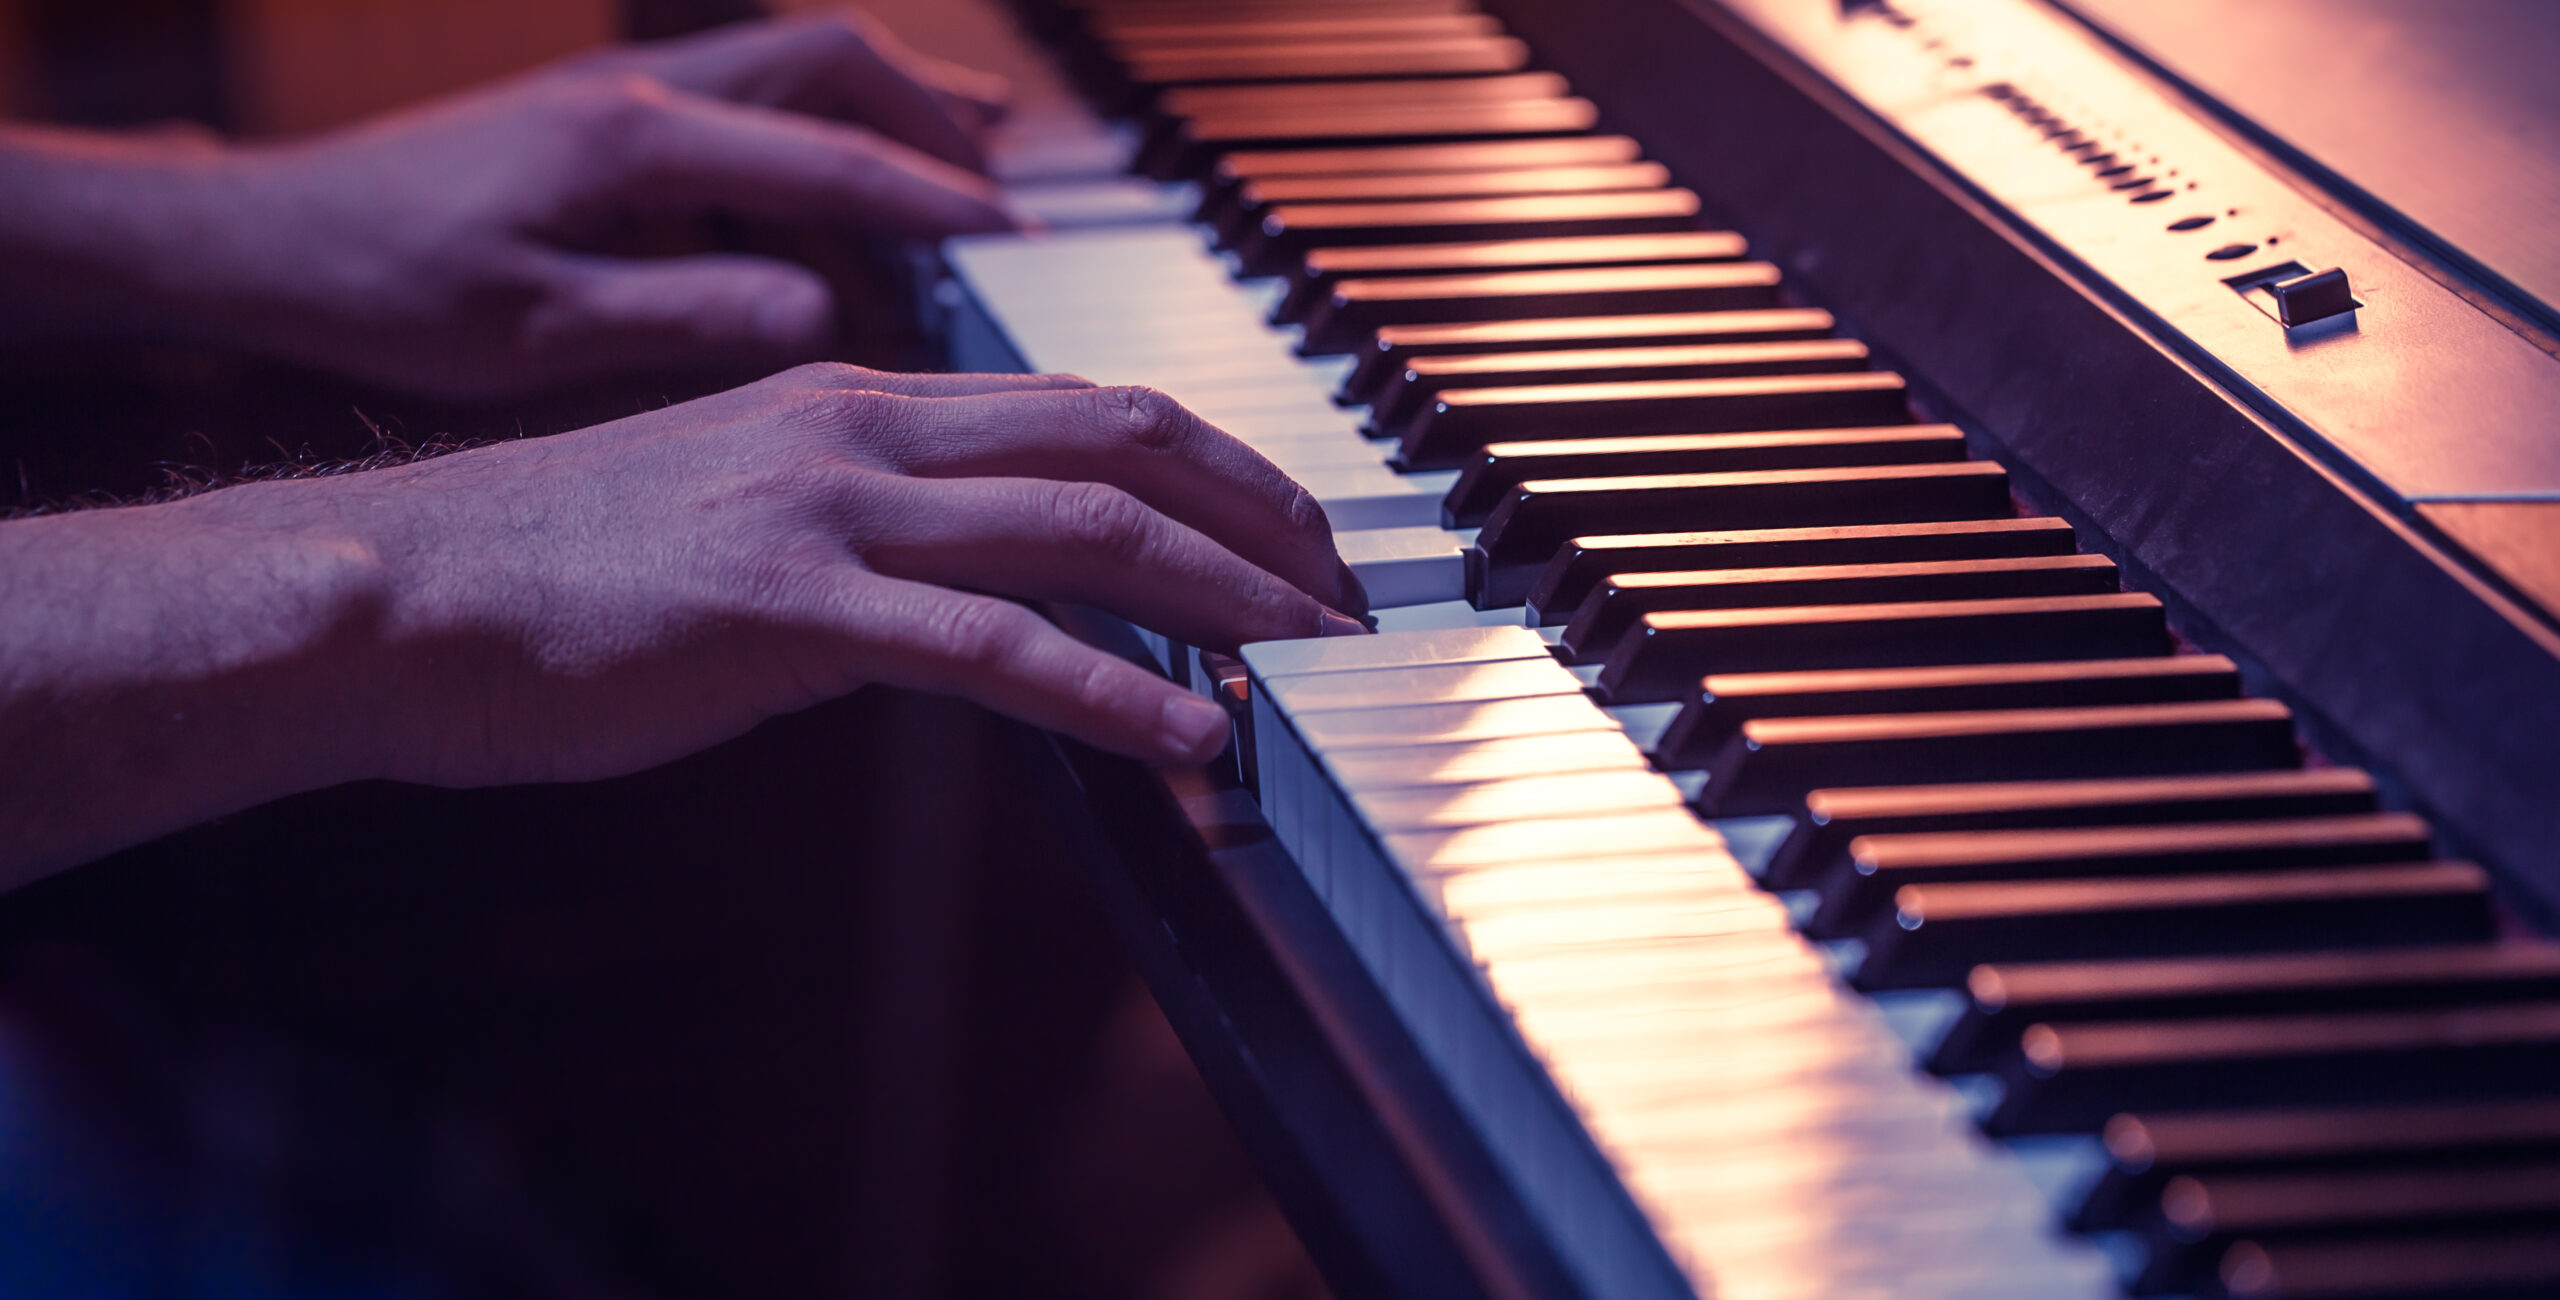 A color photo of light skinned male hands on a piano keyboard.